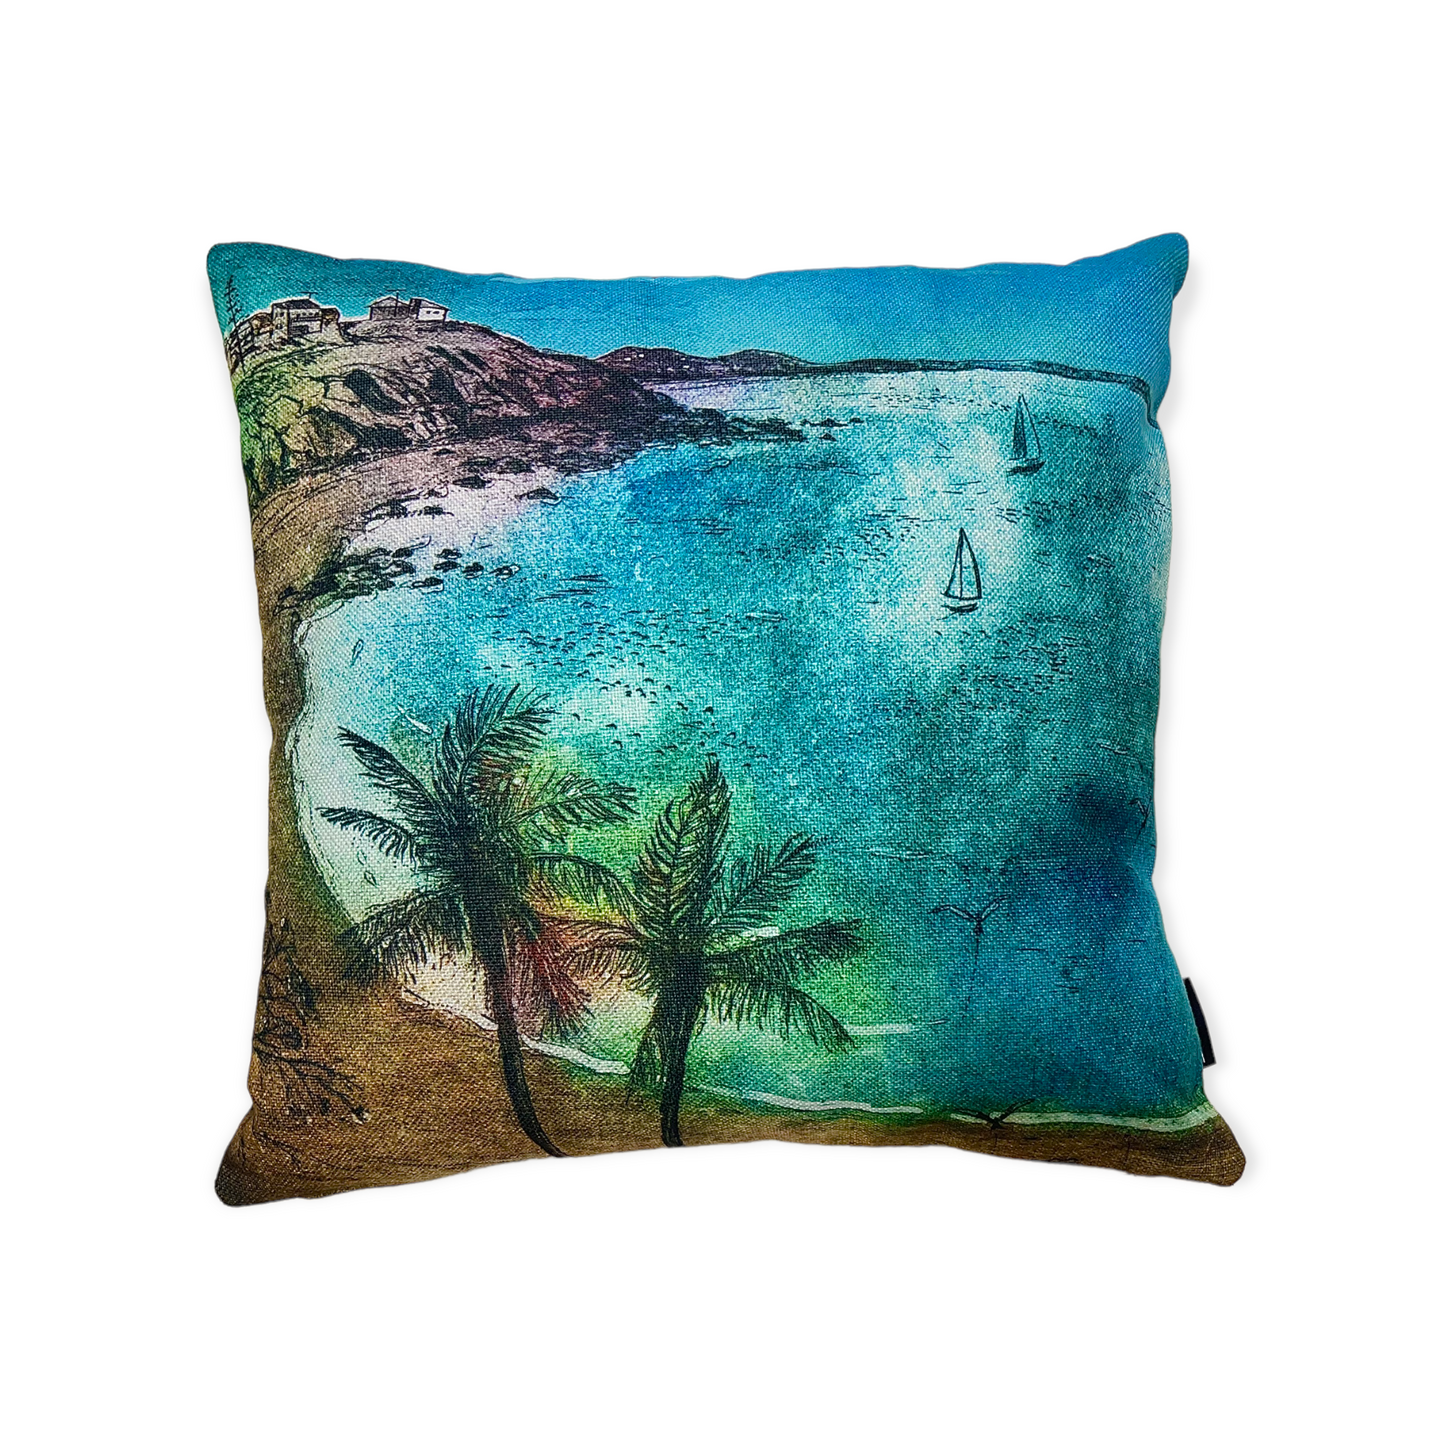 Cooee Bay 2 Cushion Cover